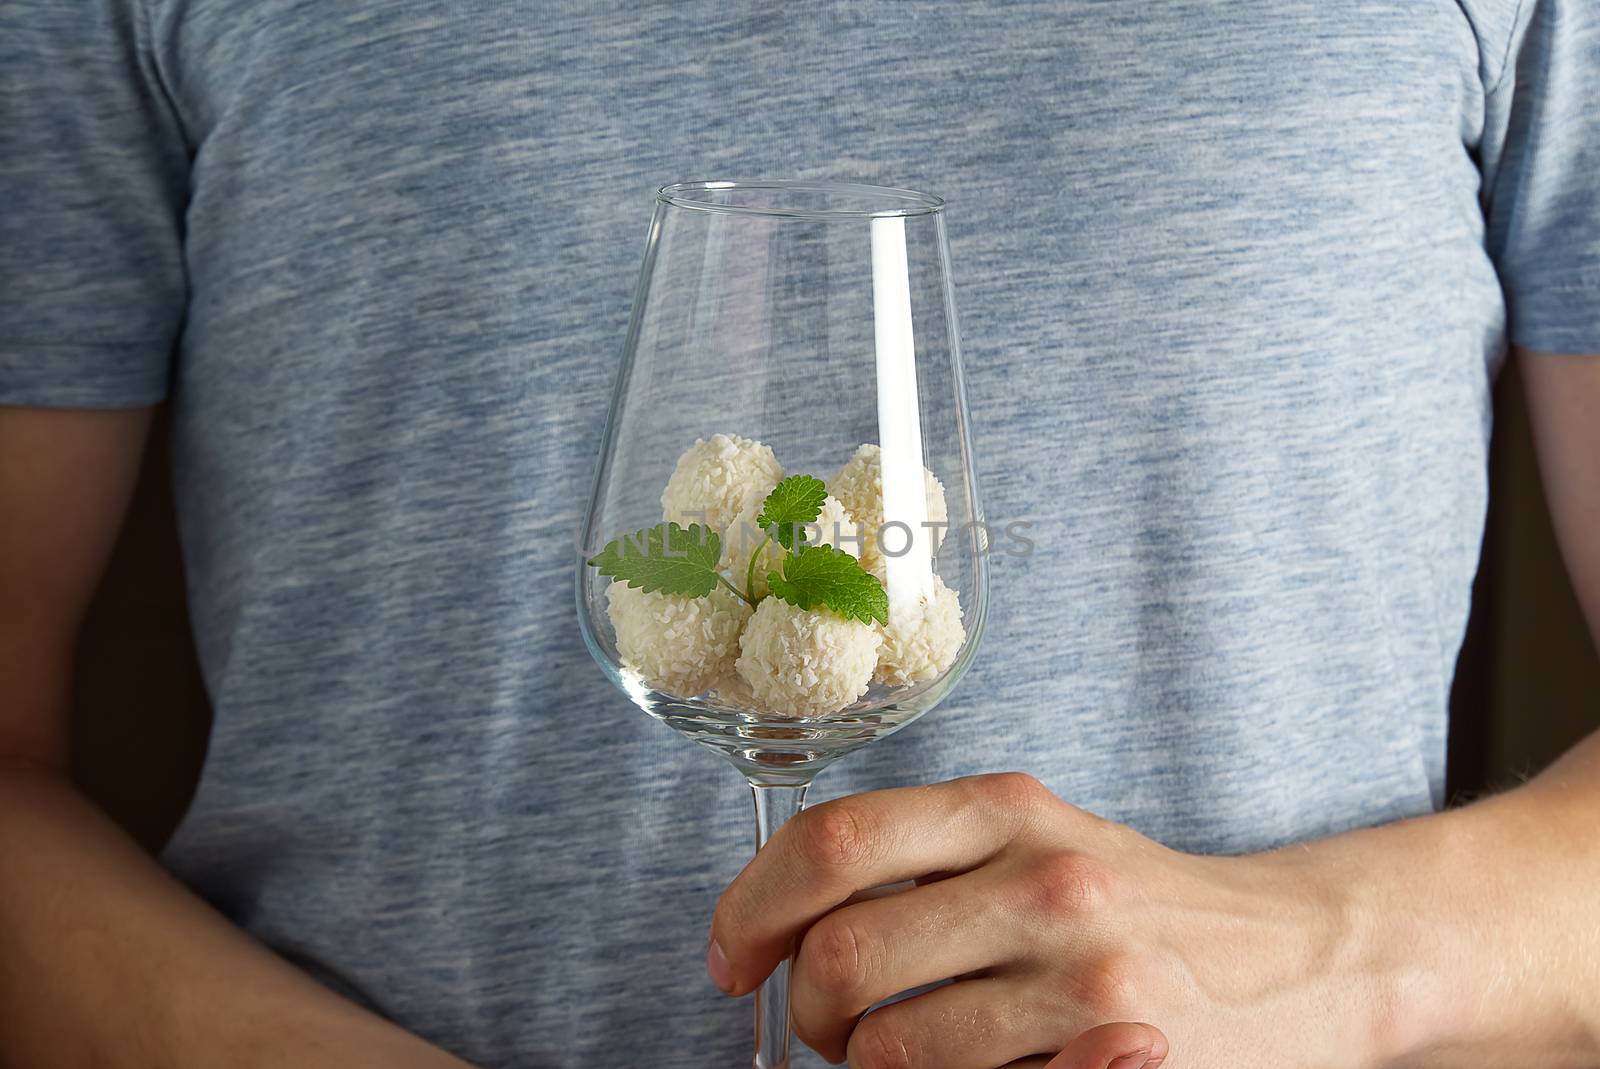 White Coconut Truffles in wine glass with mint leave. Man holding wine glass with Coconut cookies